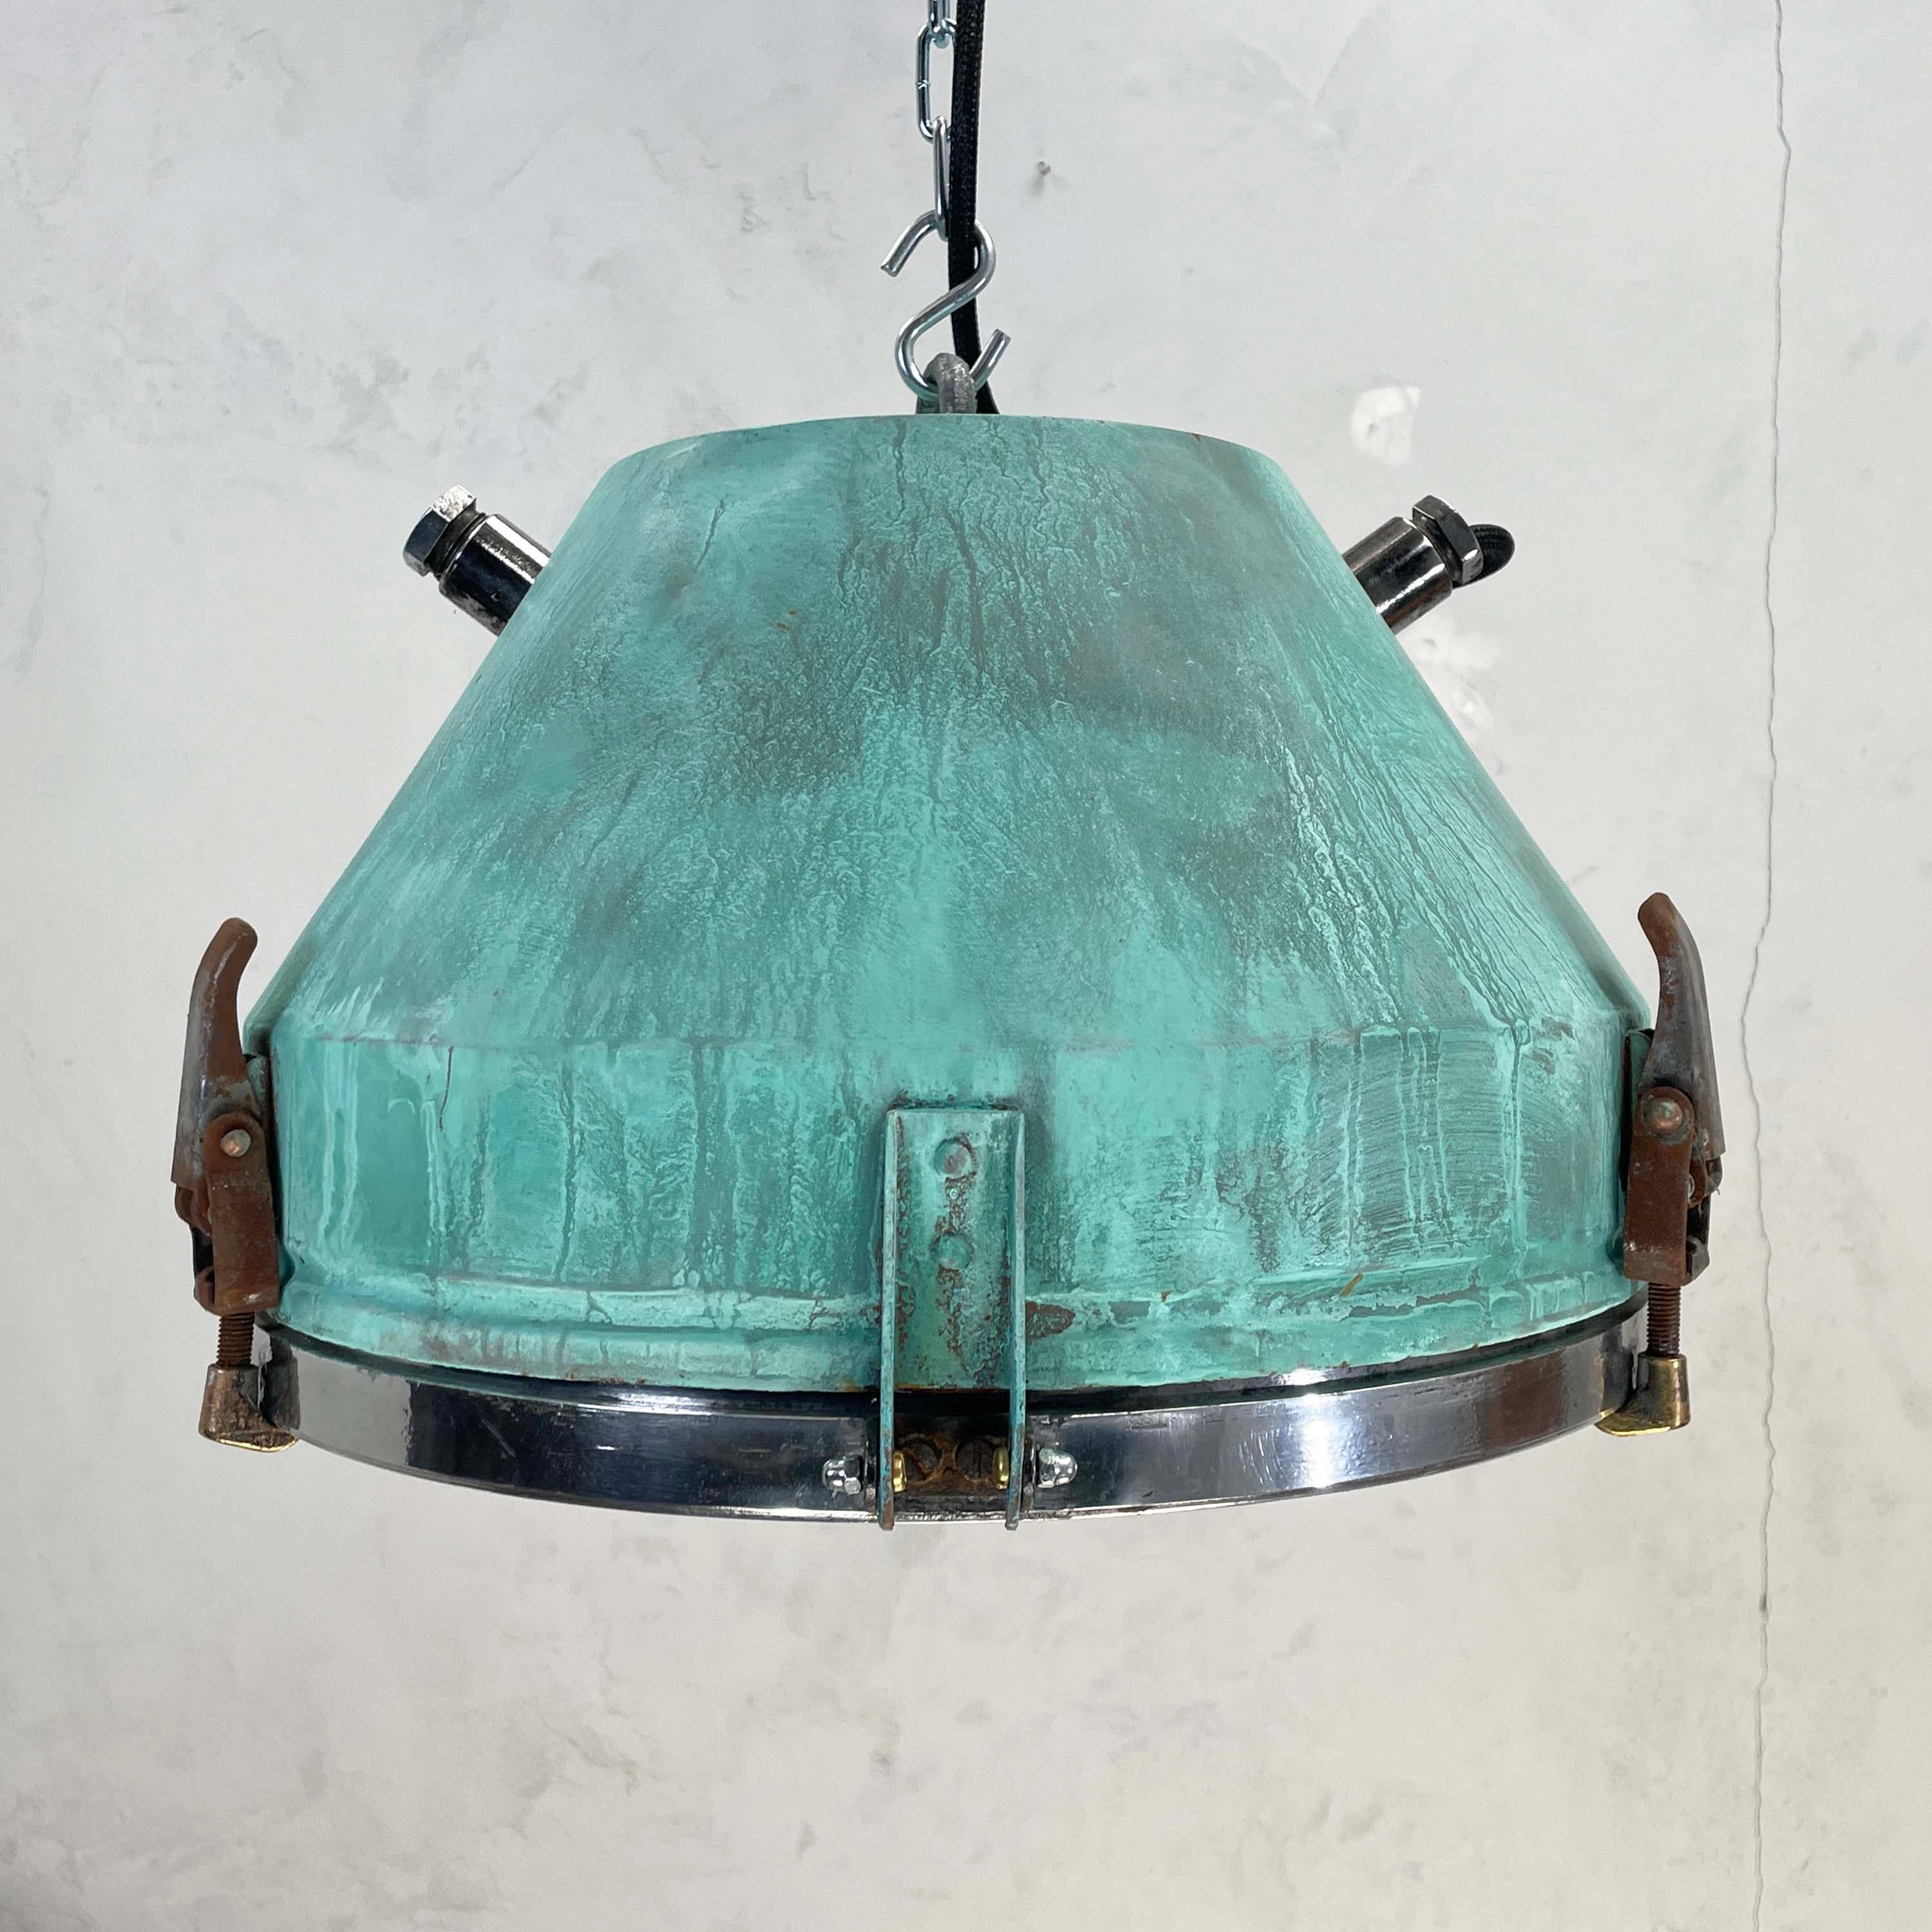 A verdigris industrial ceiling light with glass cover by VEB of Germany manufactured mid century. Professionally restored by hand in UK by Loomlight to modern lighting standards for contemporary interiors. 

The verdigris is applied using our